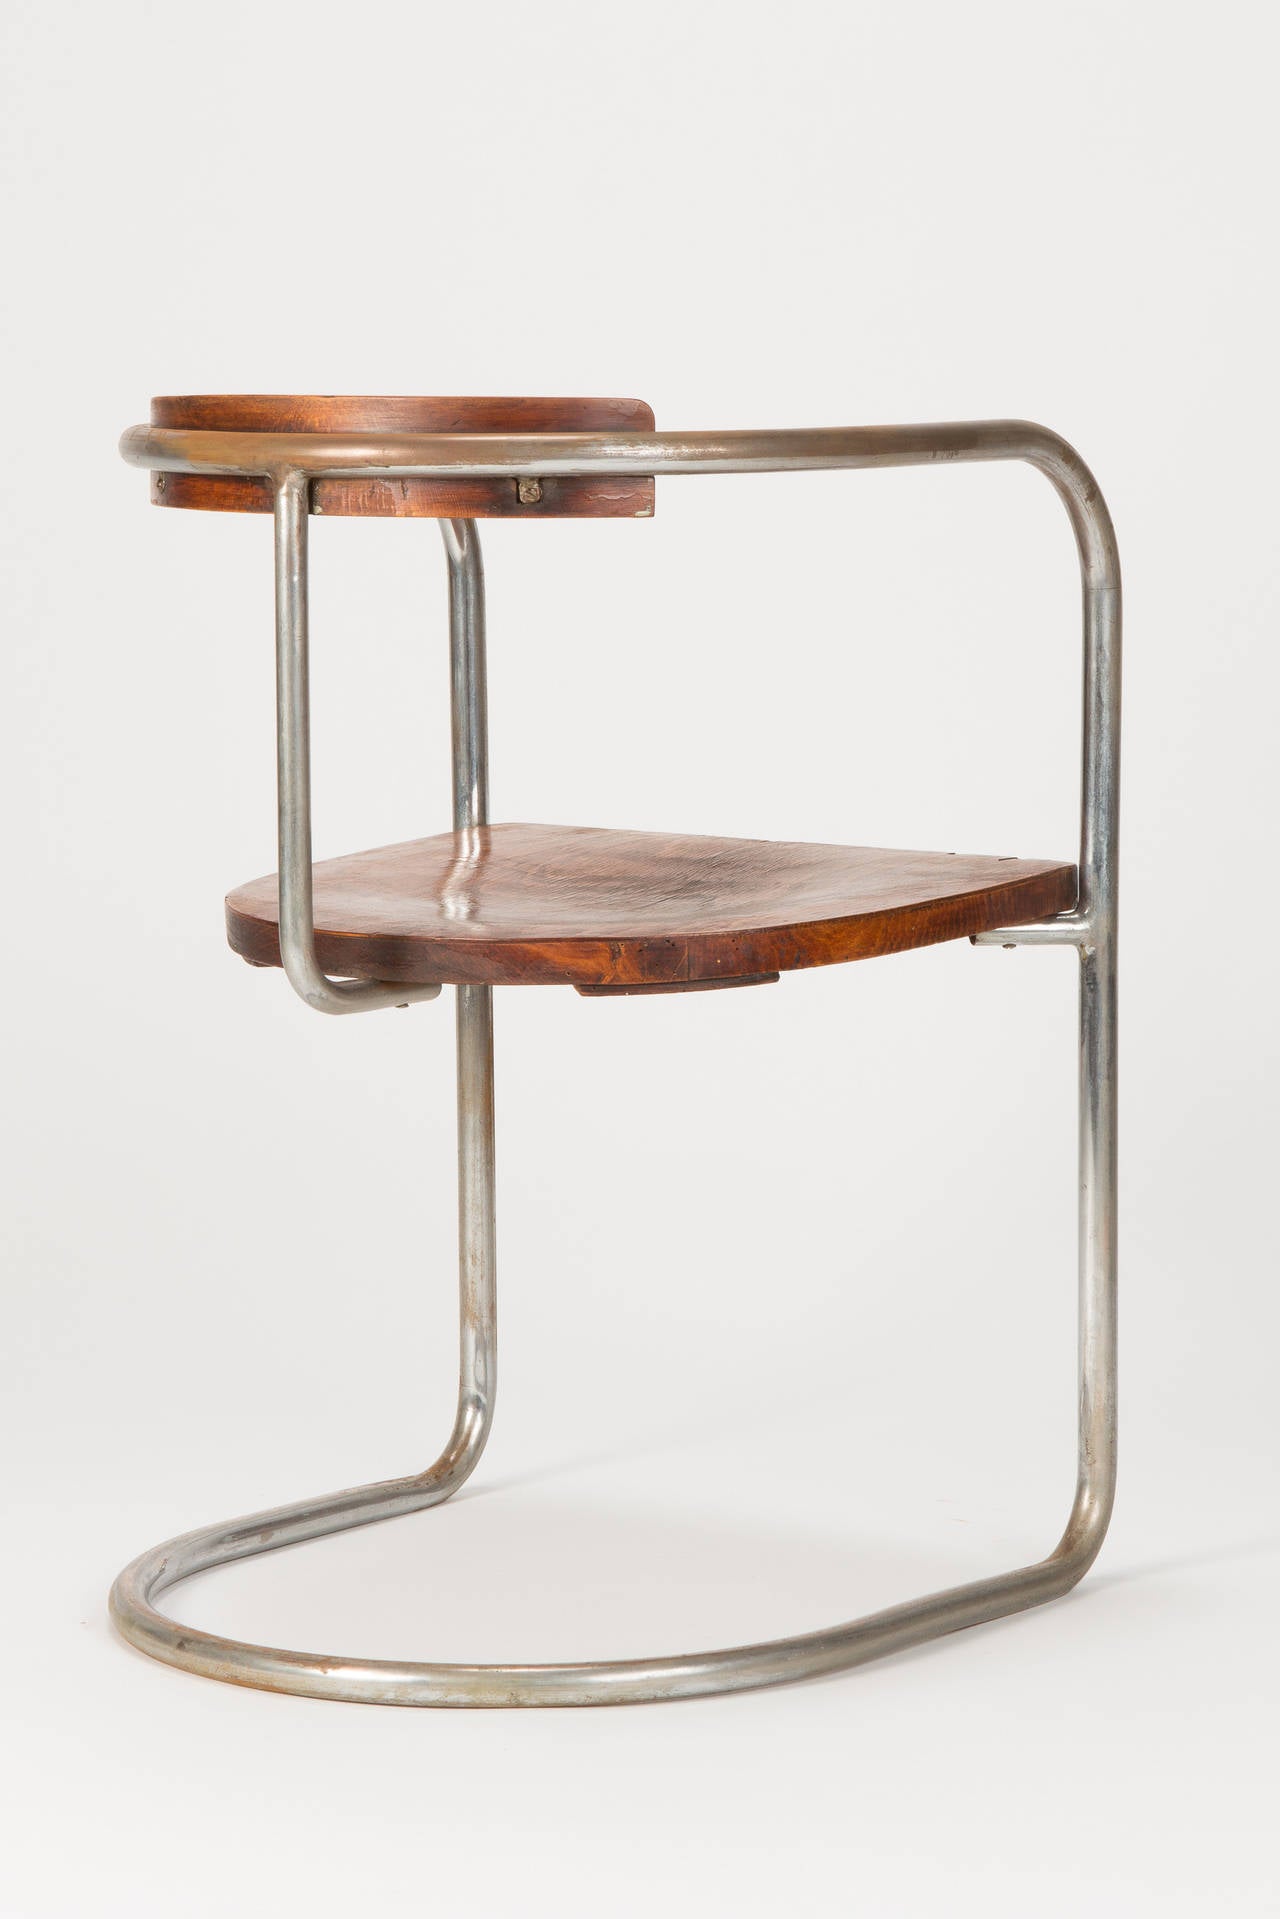 Italian Antique Bauhaus Steel Tube Cantilever Chair, Italy, 1930s For Sale